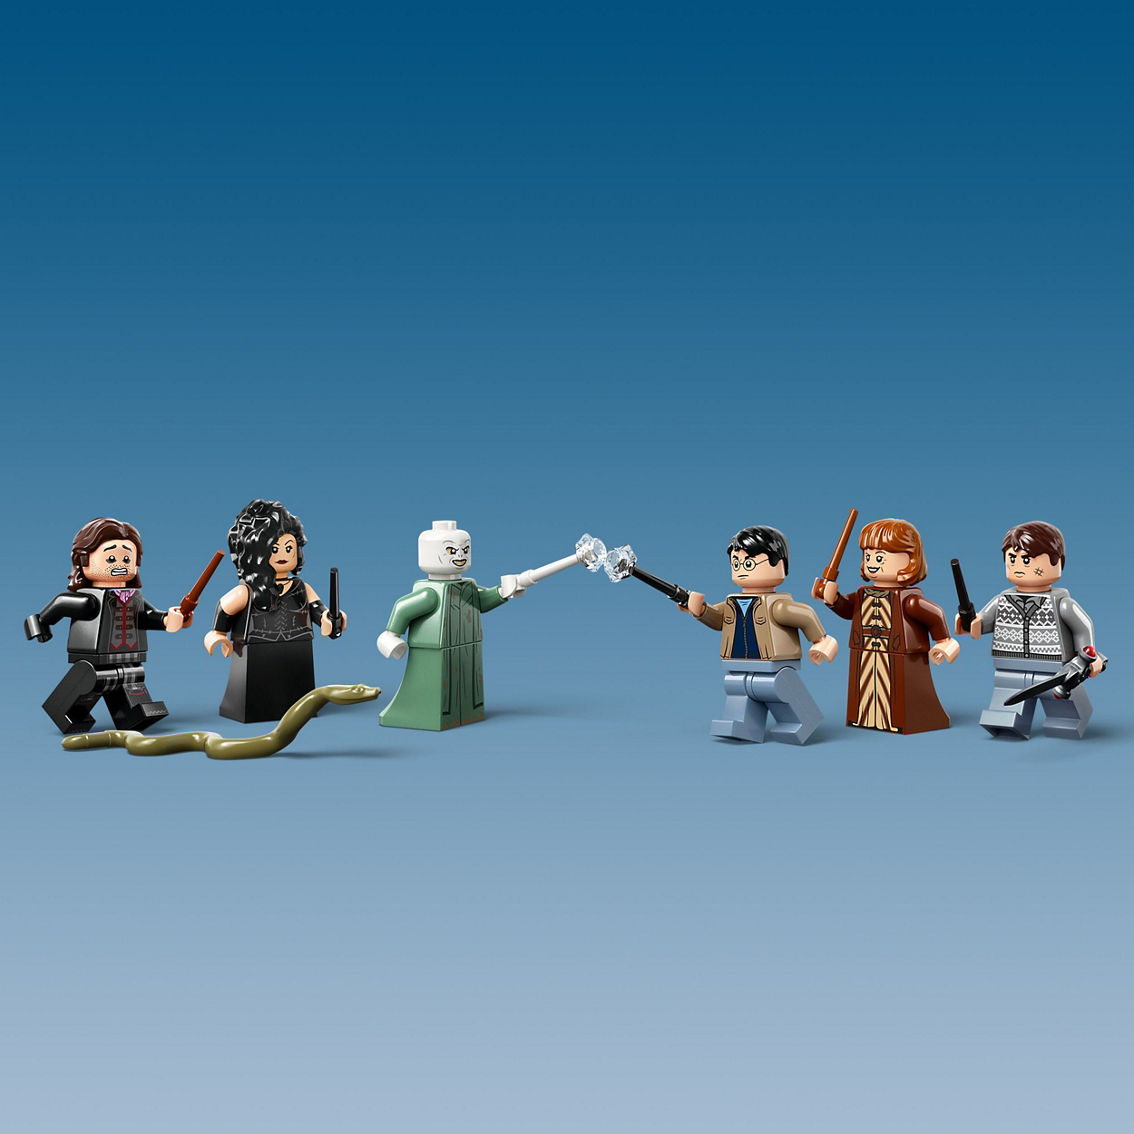  LEGO Harry Potter The Battle of Hogwarts Building Toy Set,  Harry Potter Toy for Boys, Girls and Kids Ages 9+, Features a Buildable  Castle Section and 6 Minifigures to Recreate an